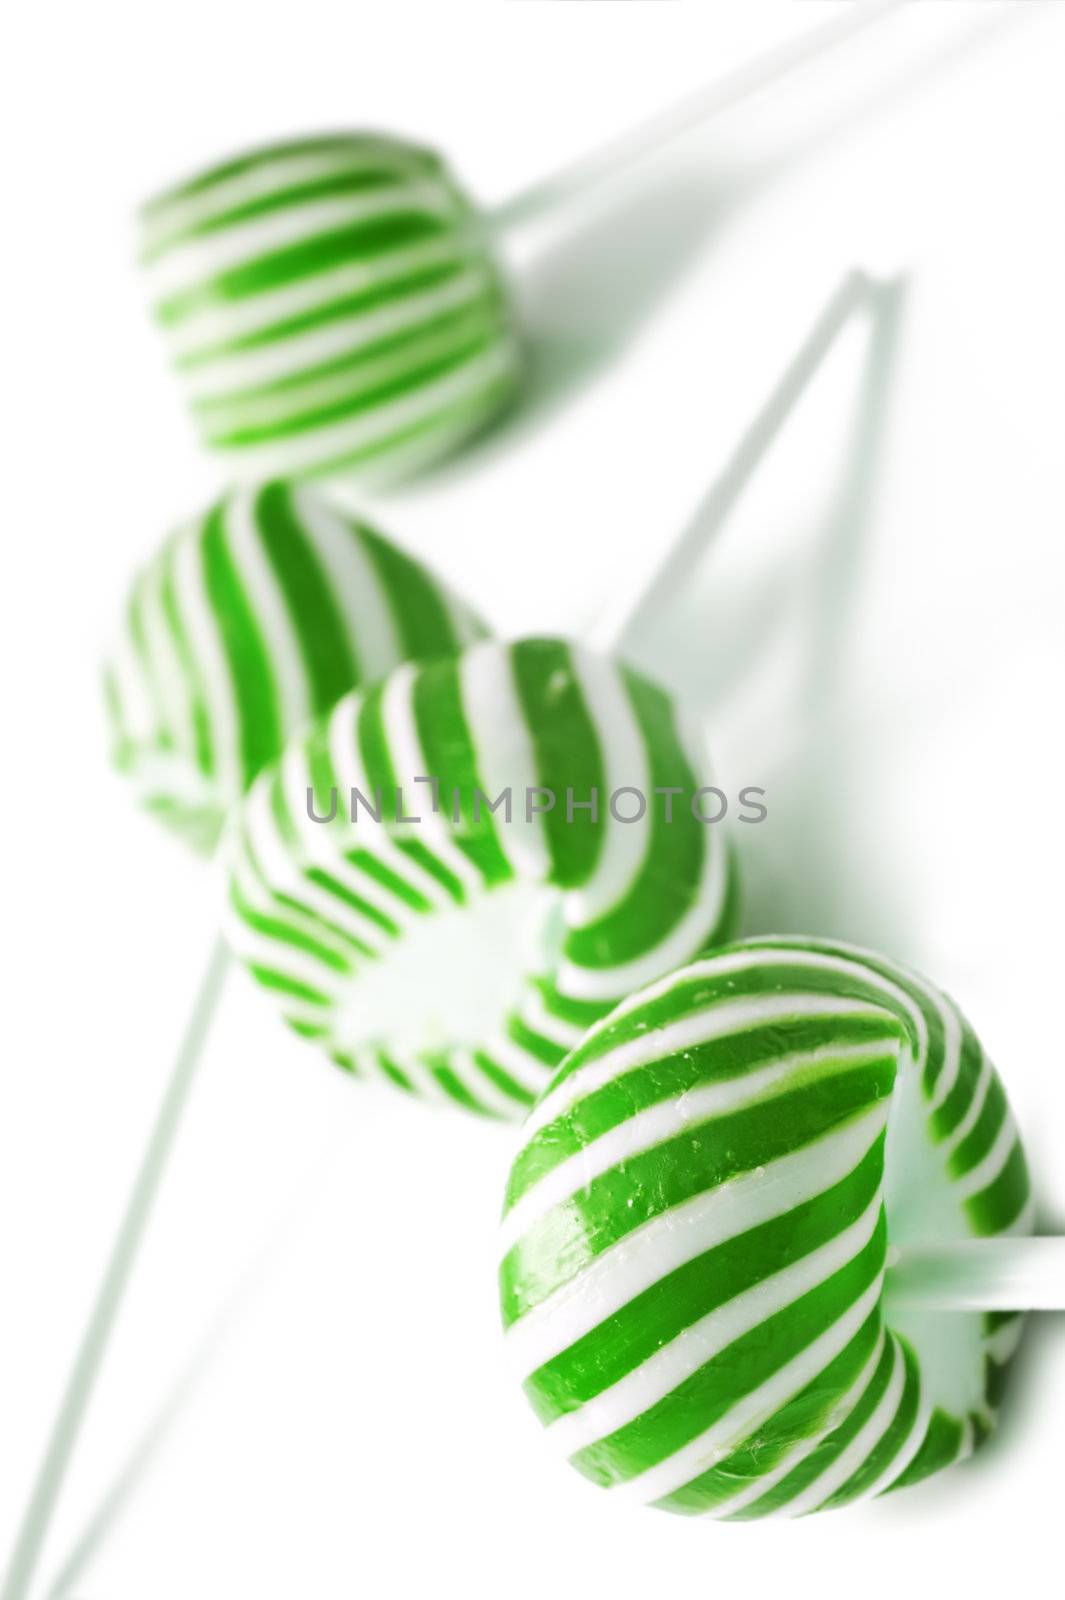 Green and white candy lolly pops on white background by tish1